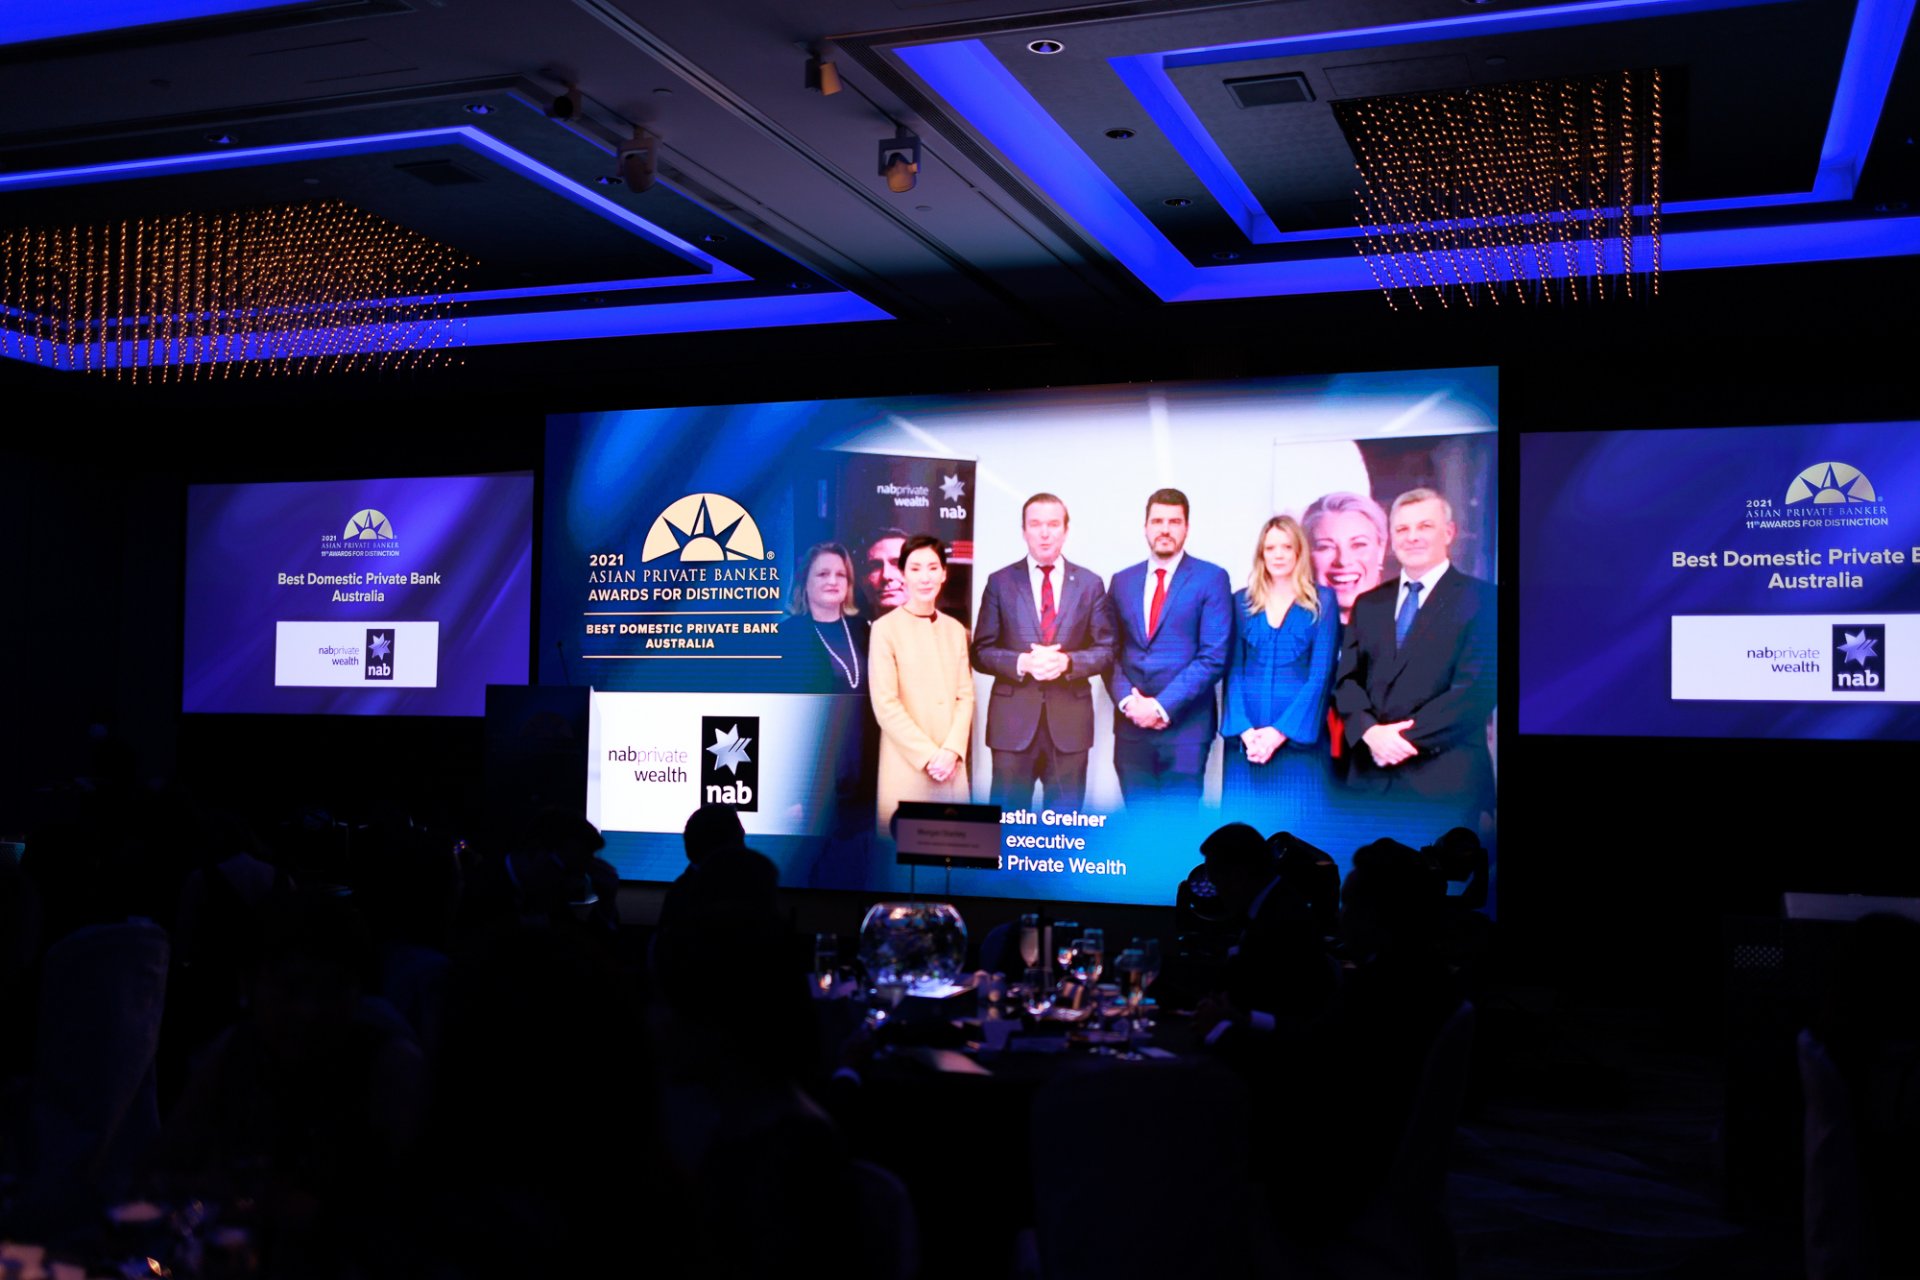 NAB Private Wealth acknowledging their win as Best Domestic Private Bank – Australia